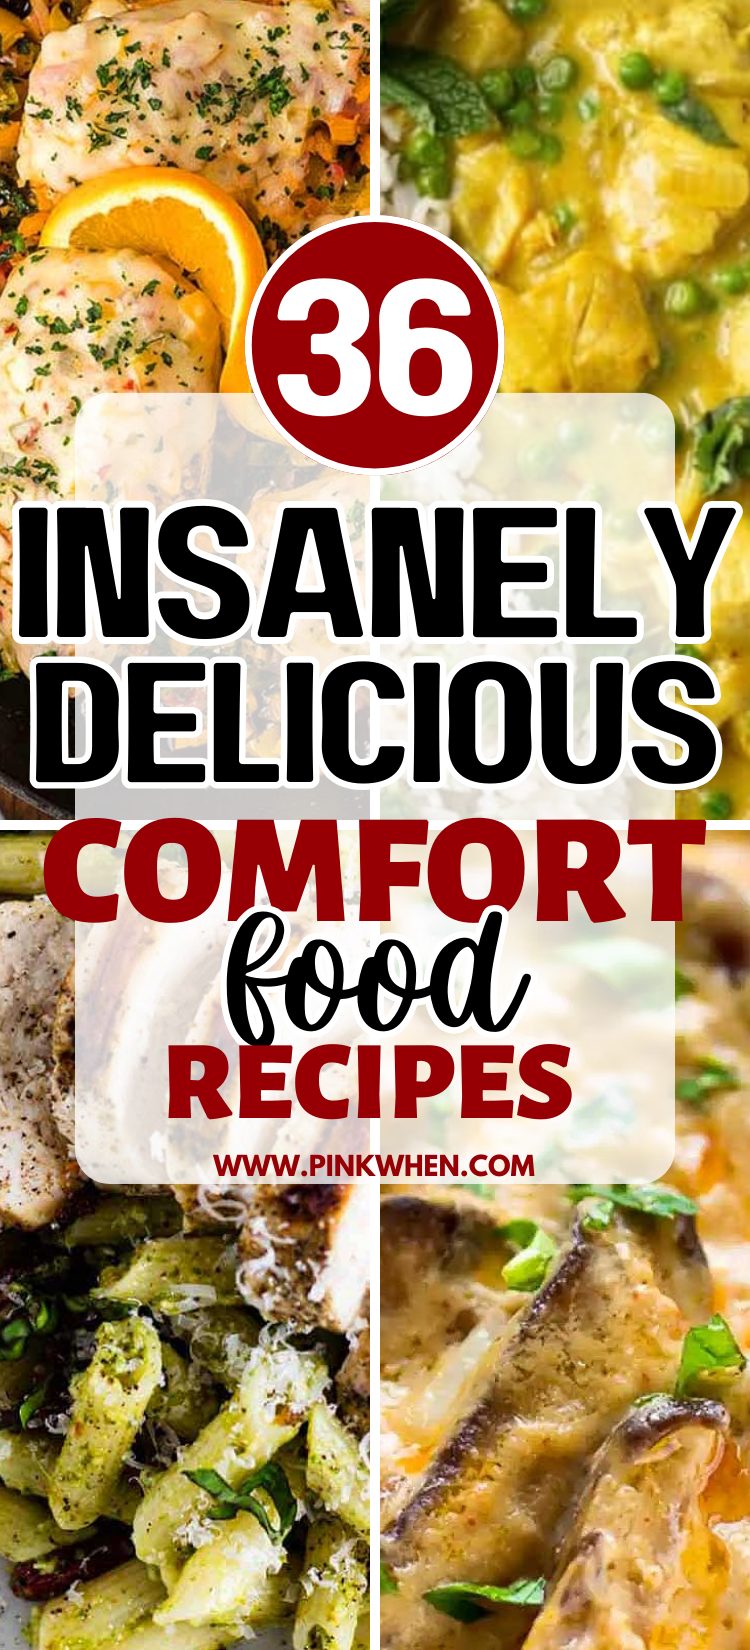 36 Insanely Delicious Comfort Food Recipes